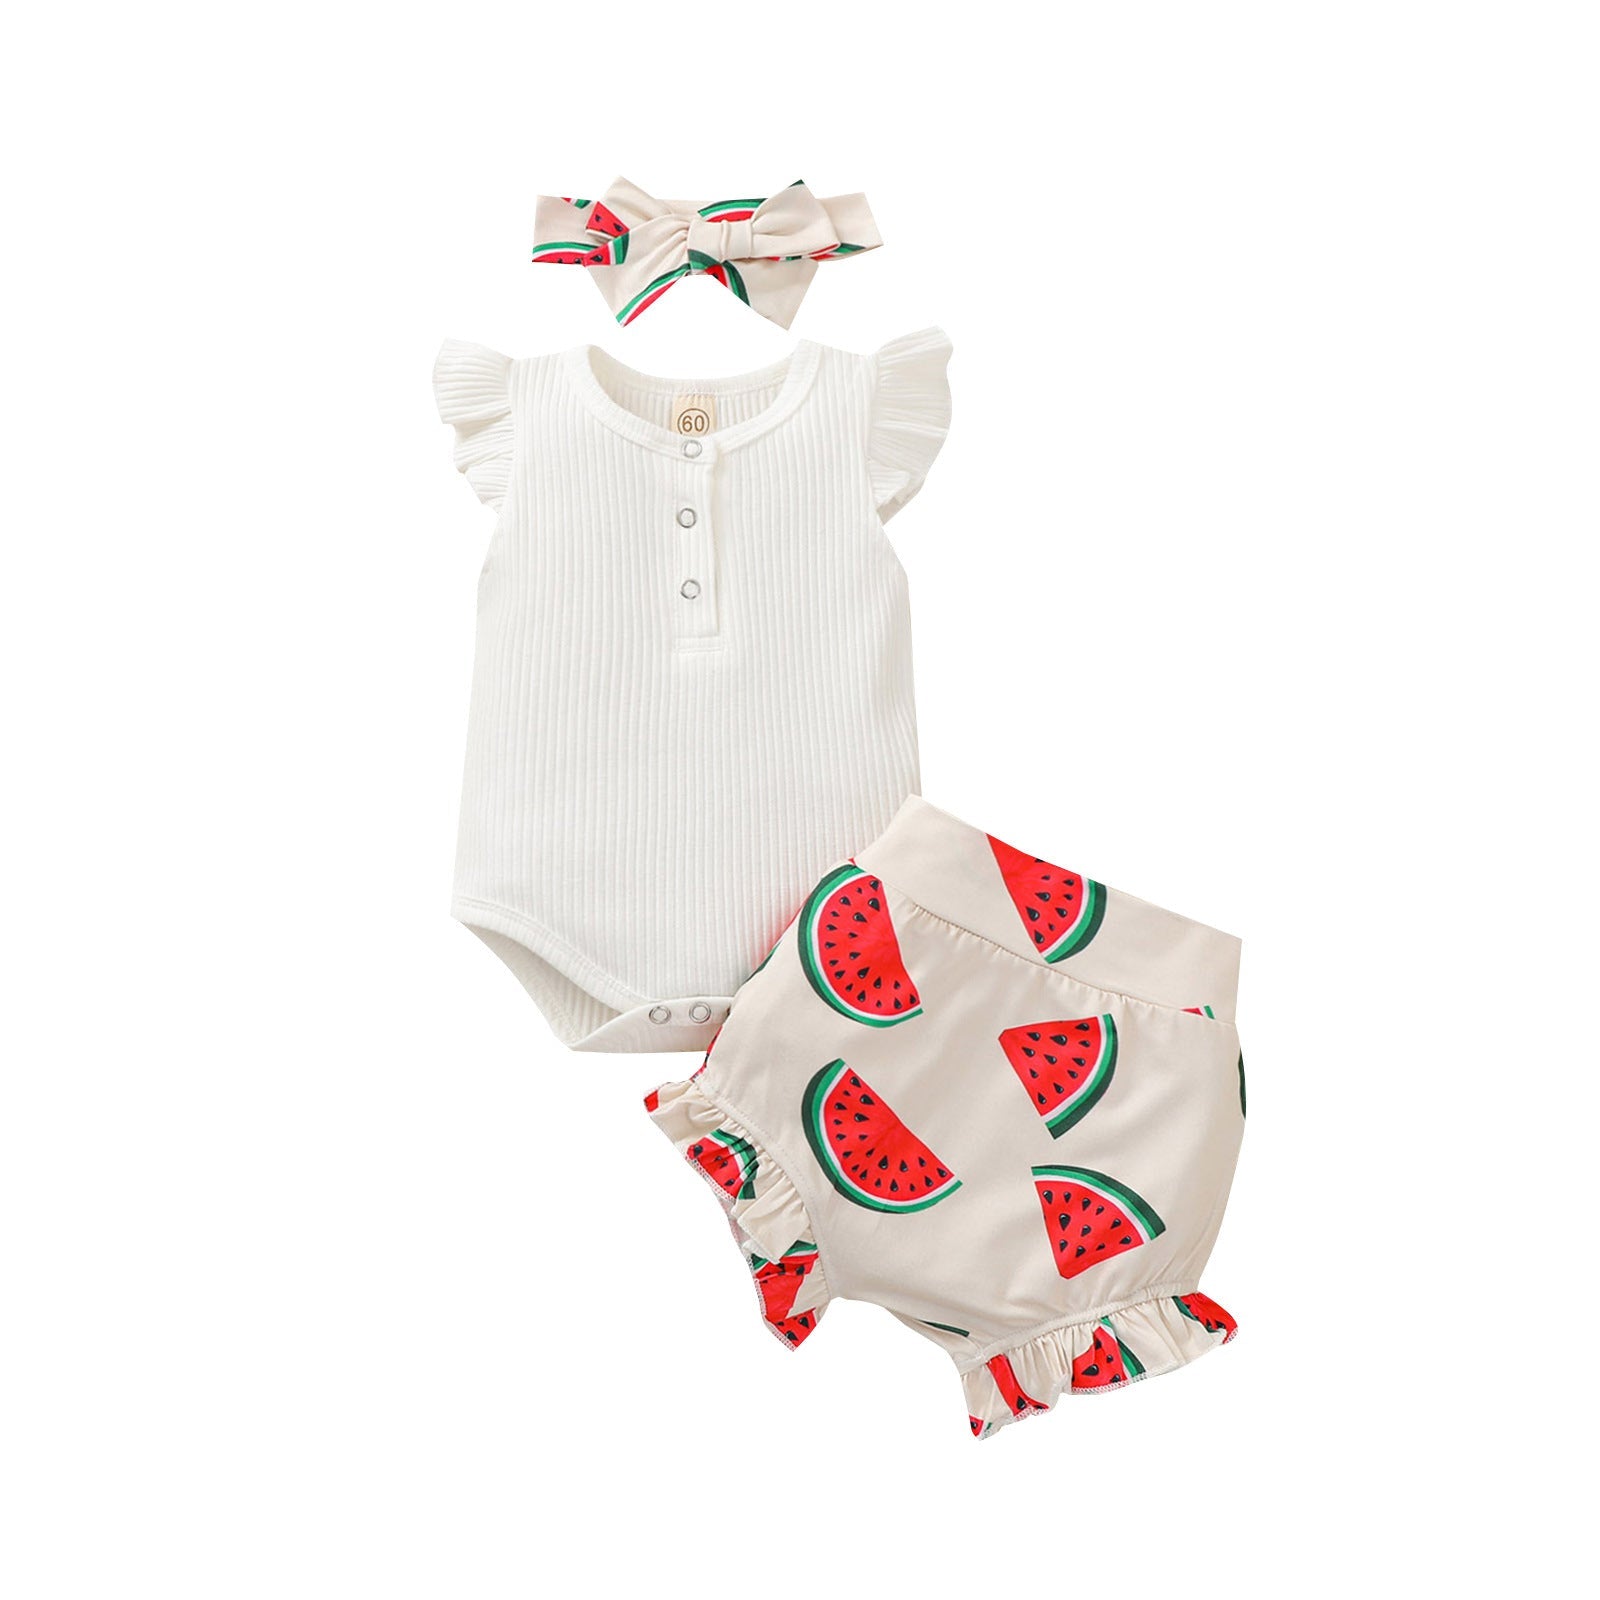 Girls' Baby Suit White Fly Sleeve Top Printed Shorts Three Pieces